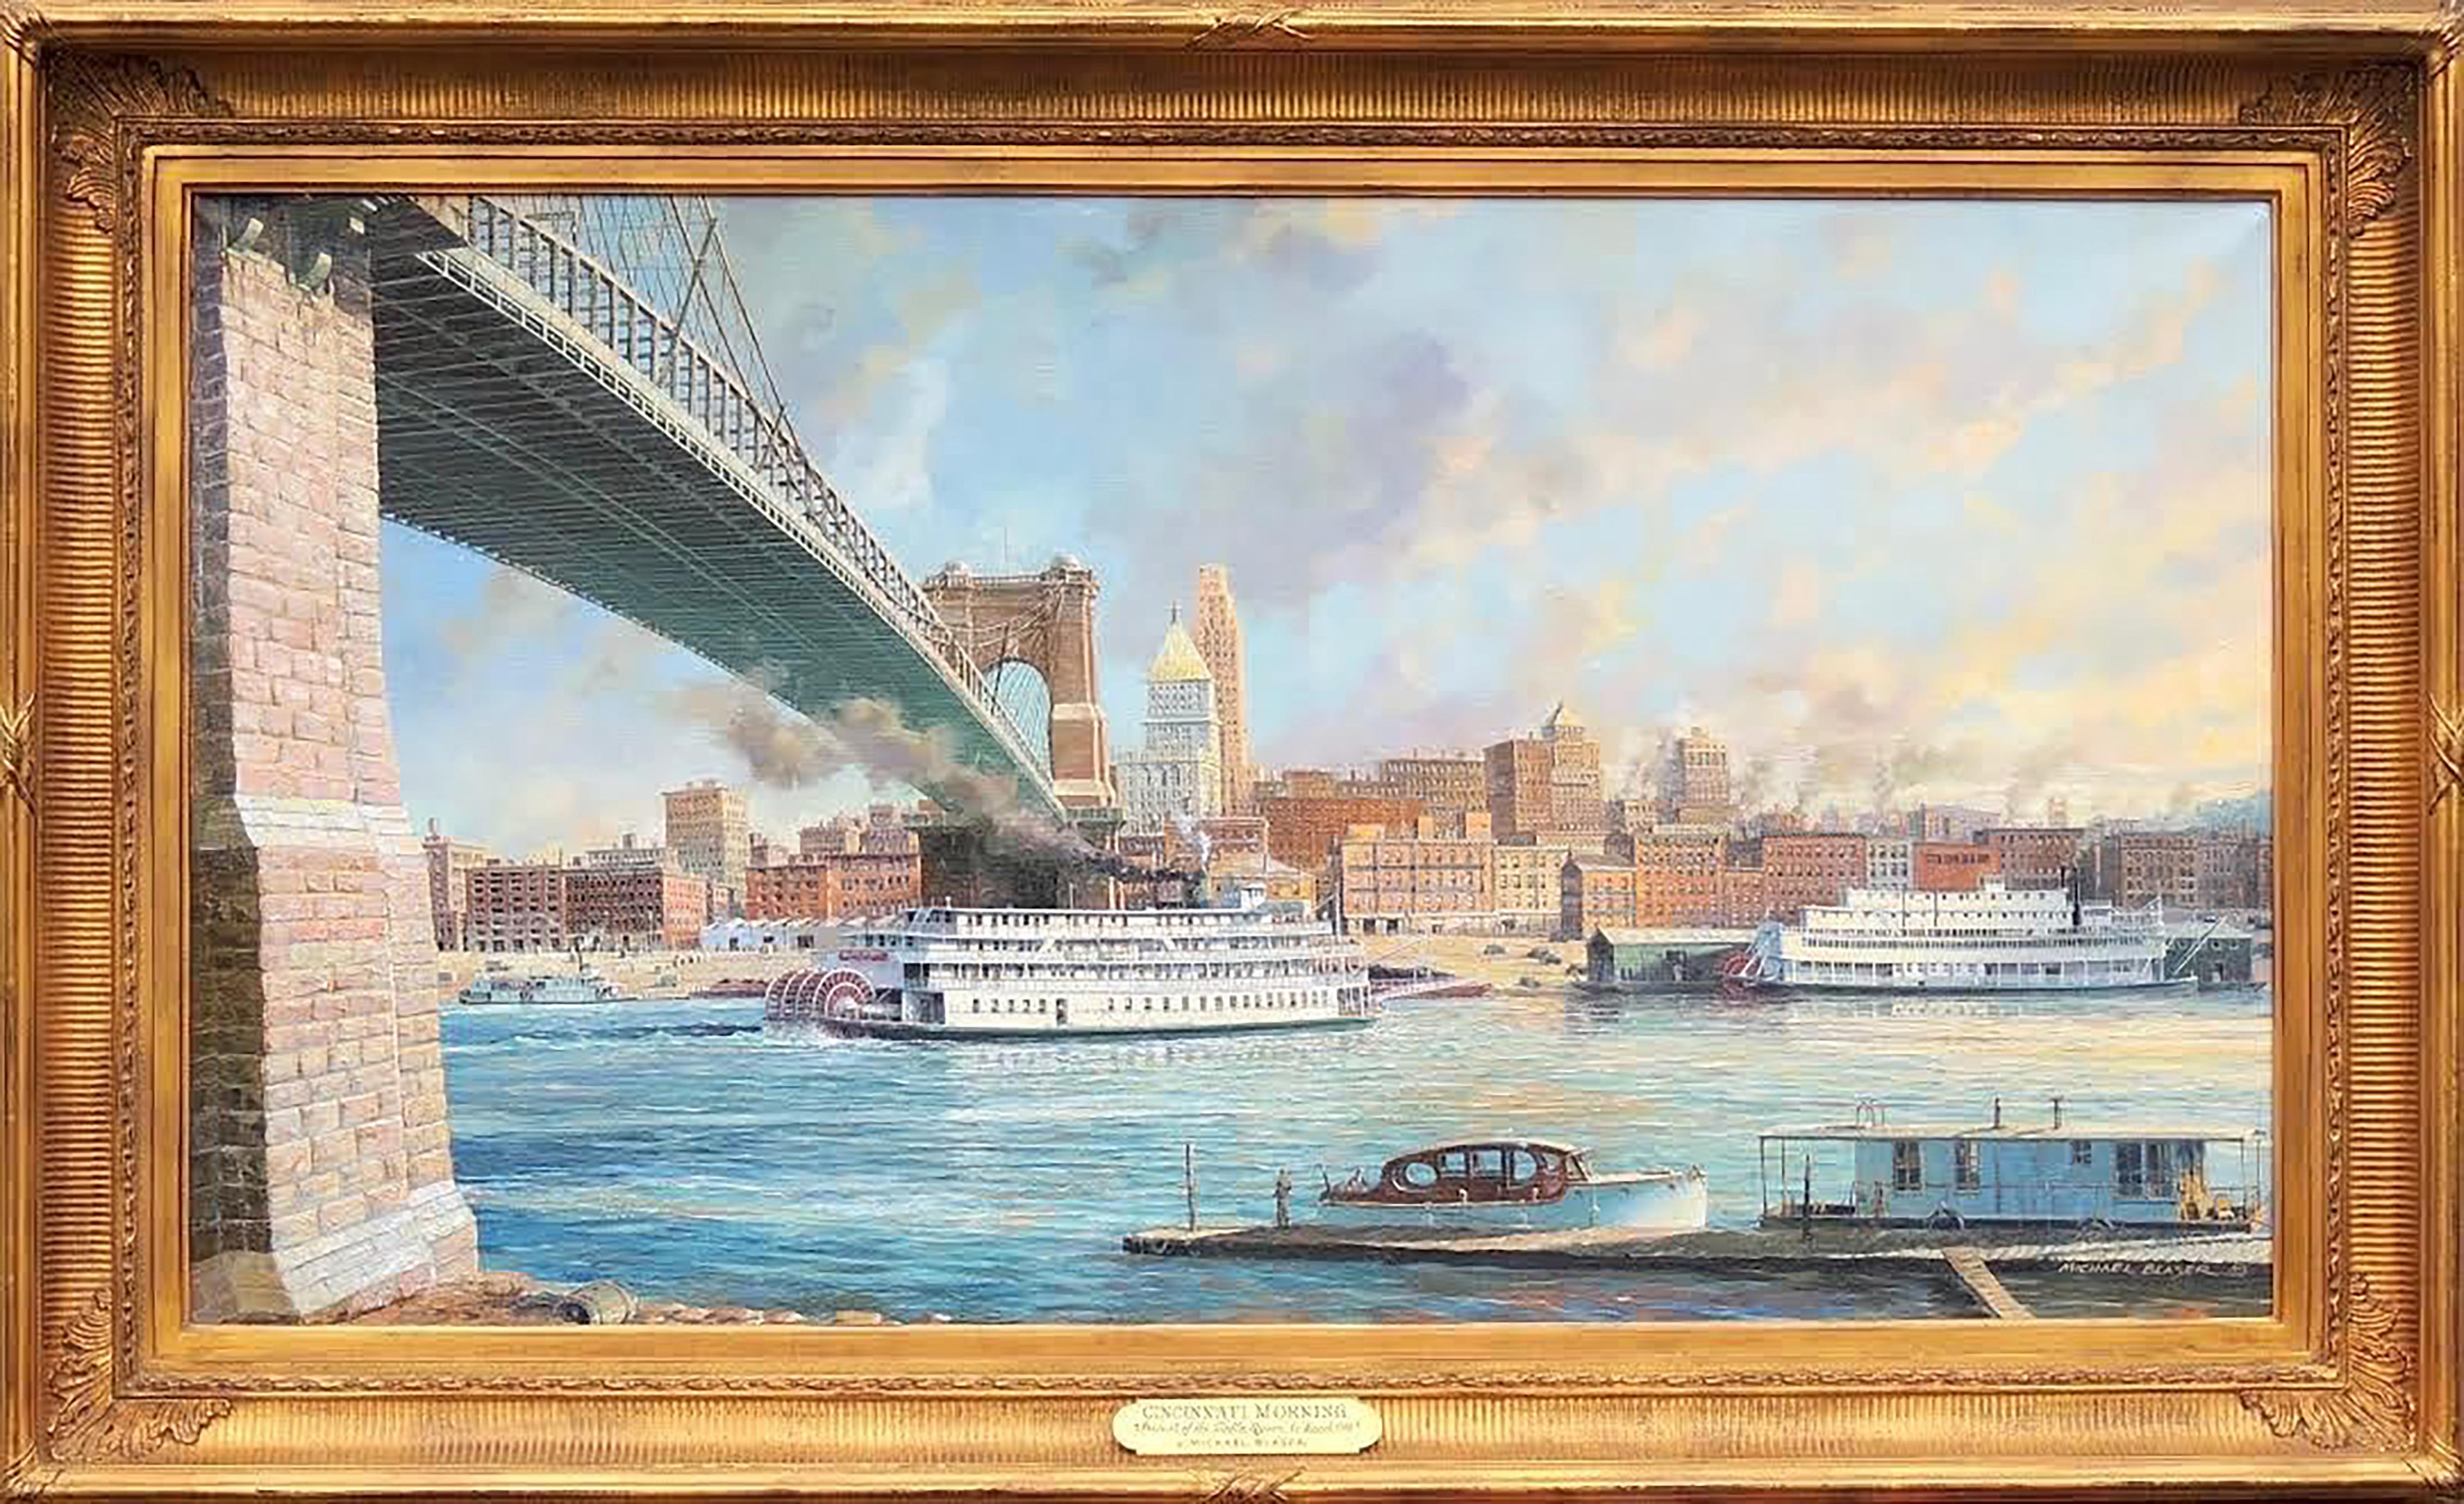 Cincinnati Morning, Arrival of the Delta Queen, 1st March, 1948 - Painting by Michael Blaser